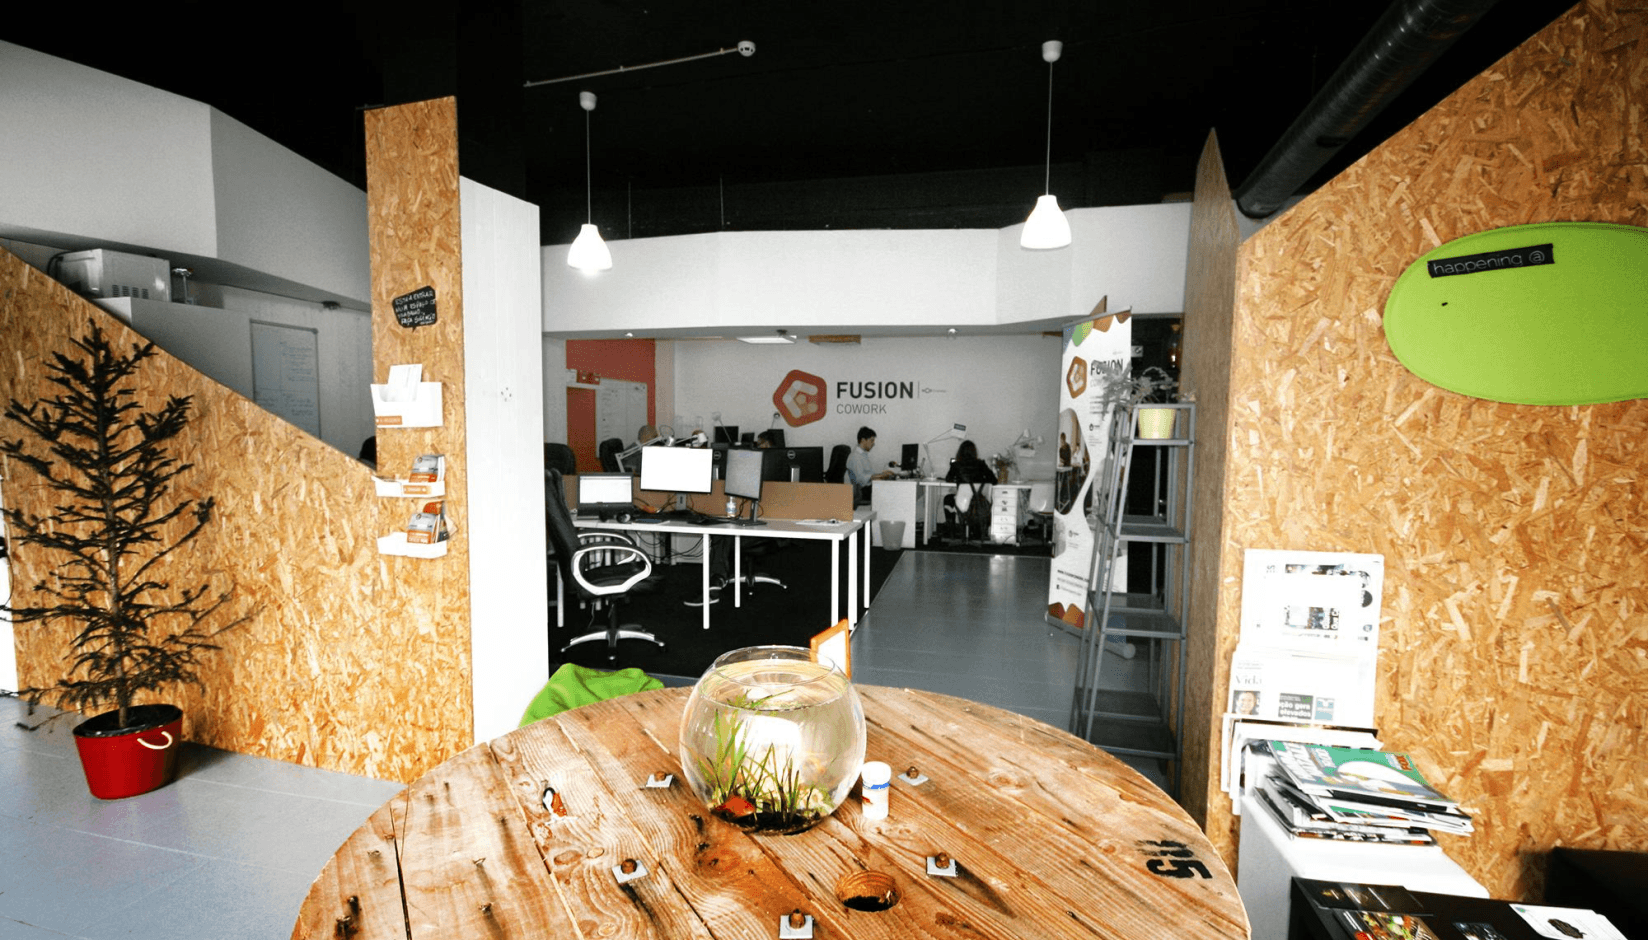 Fusion Cowork coworking space interior